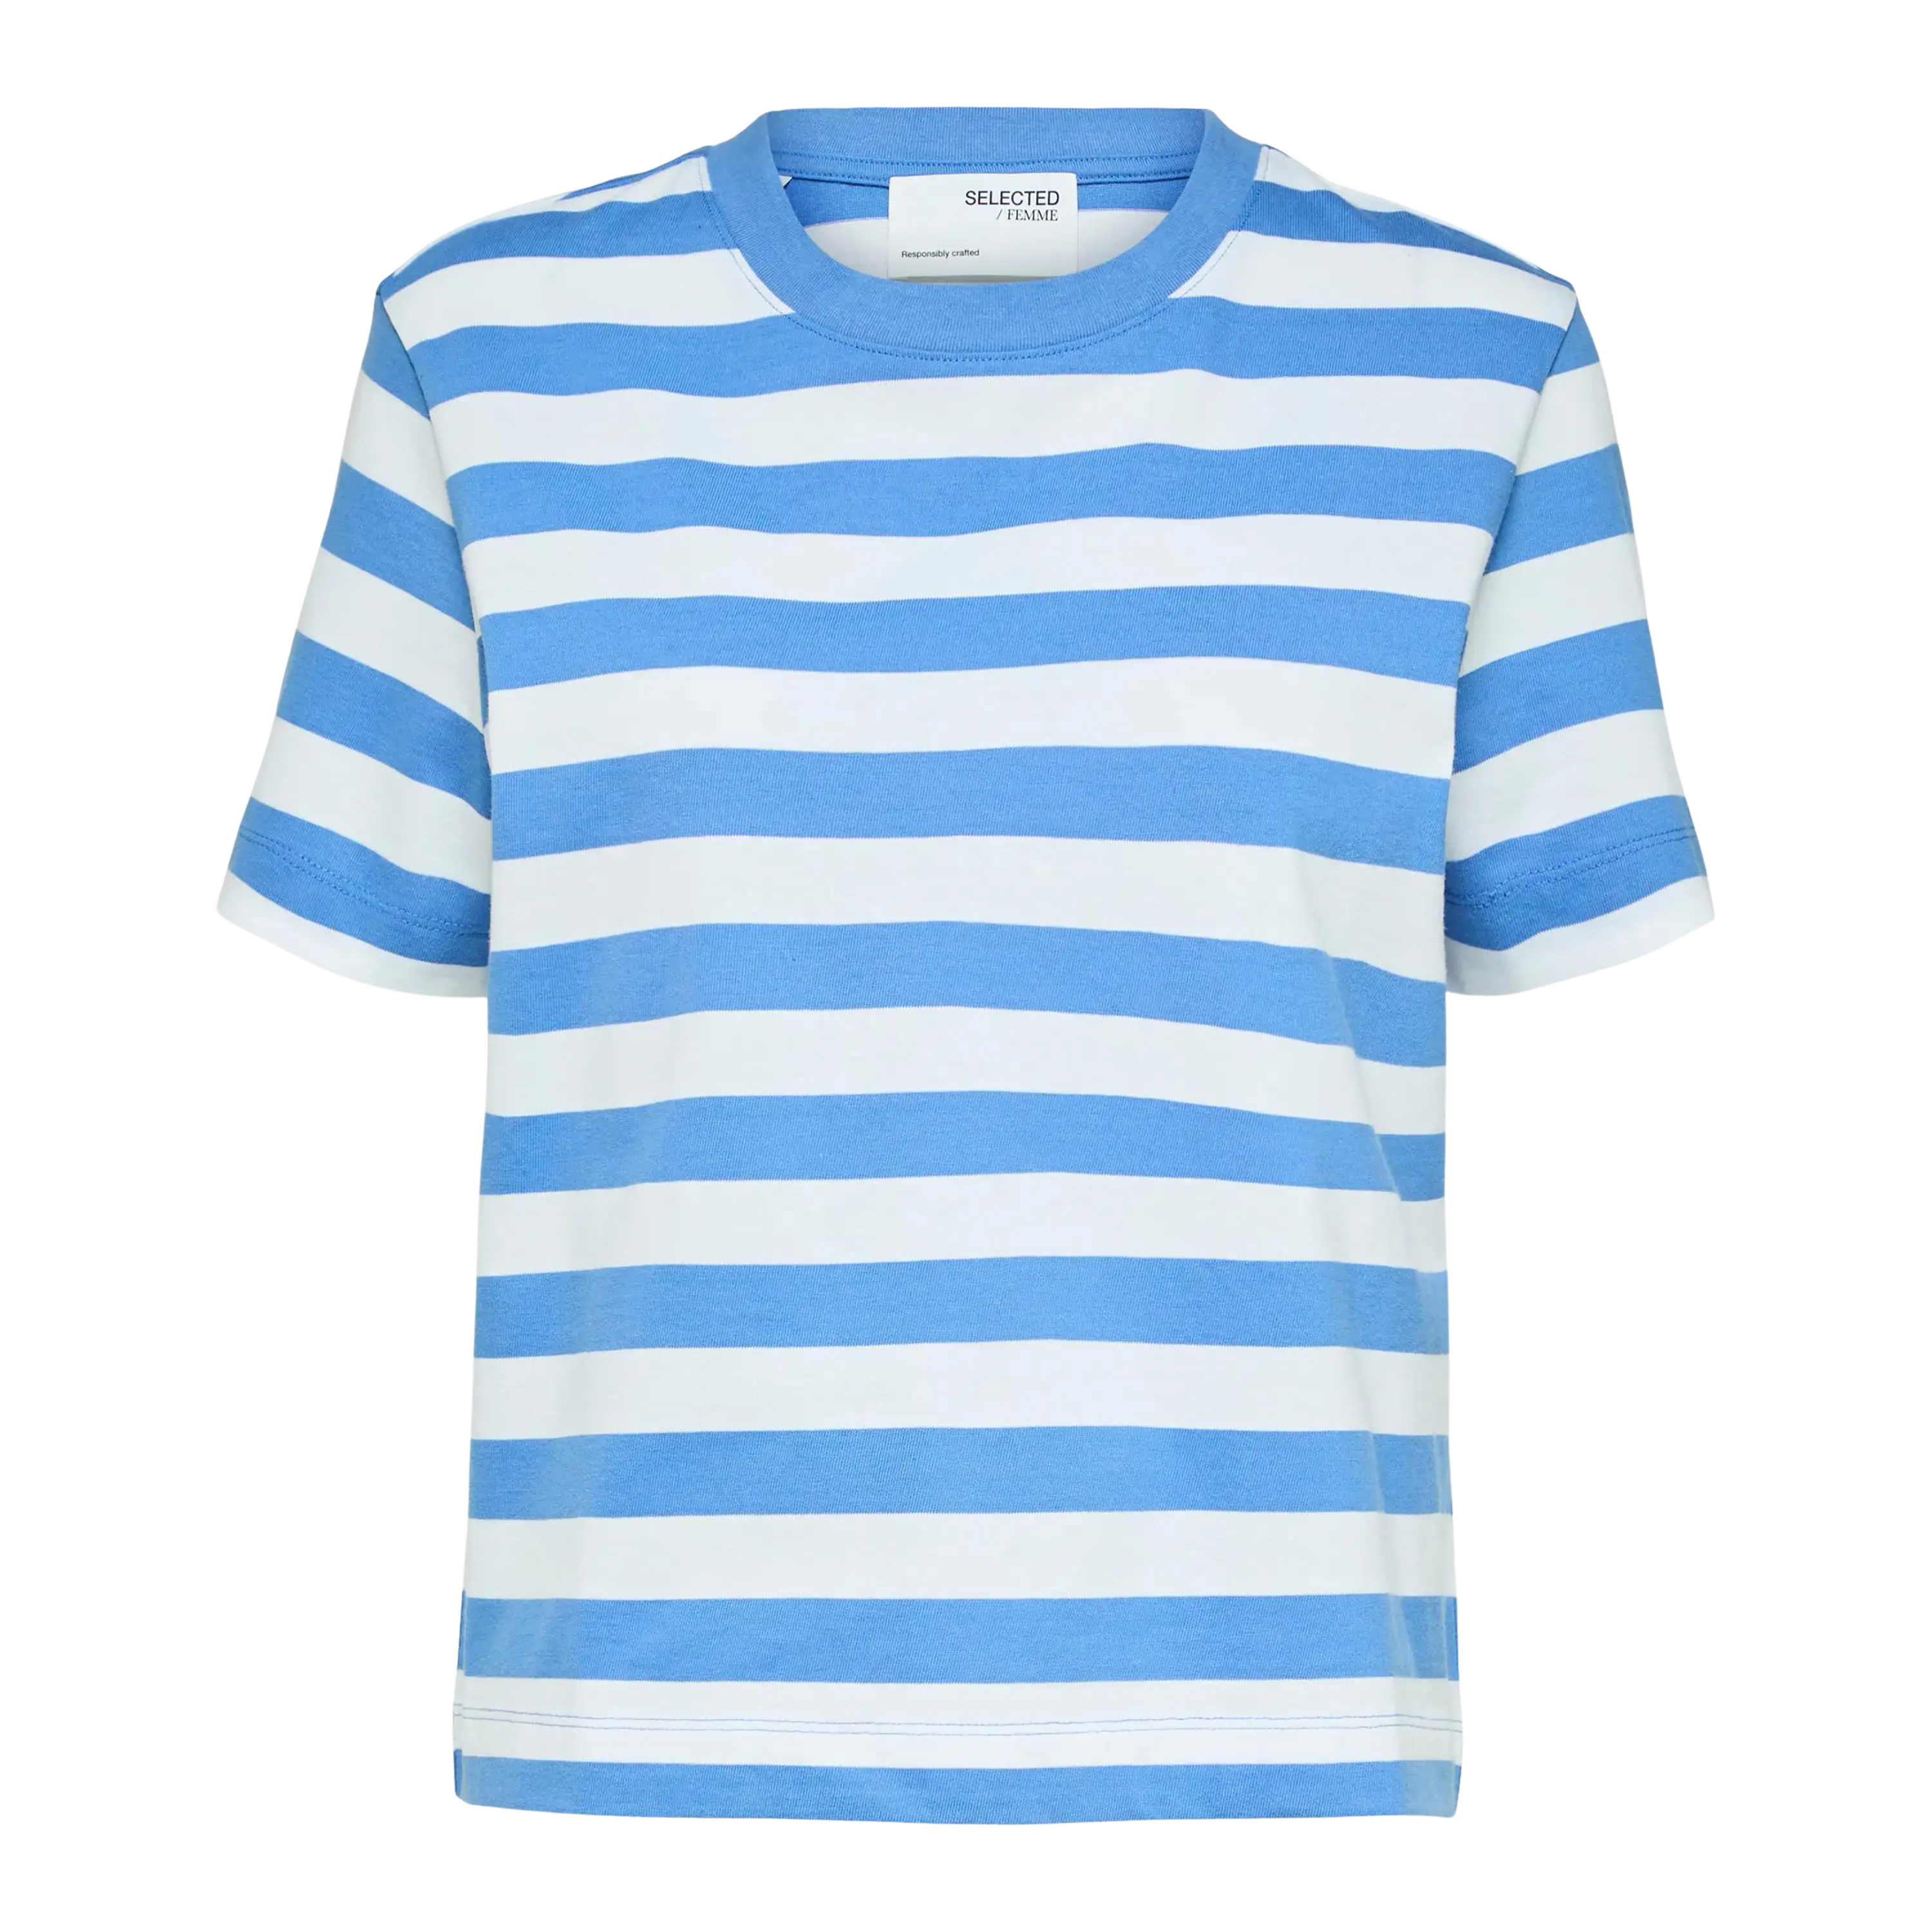 Selected Femme Essentials Short Sleeved Striped Boxy Tee for Women